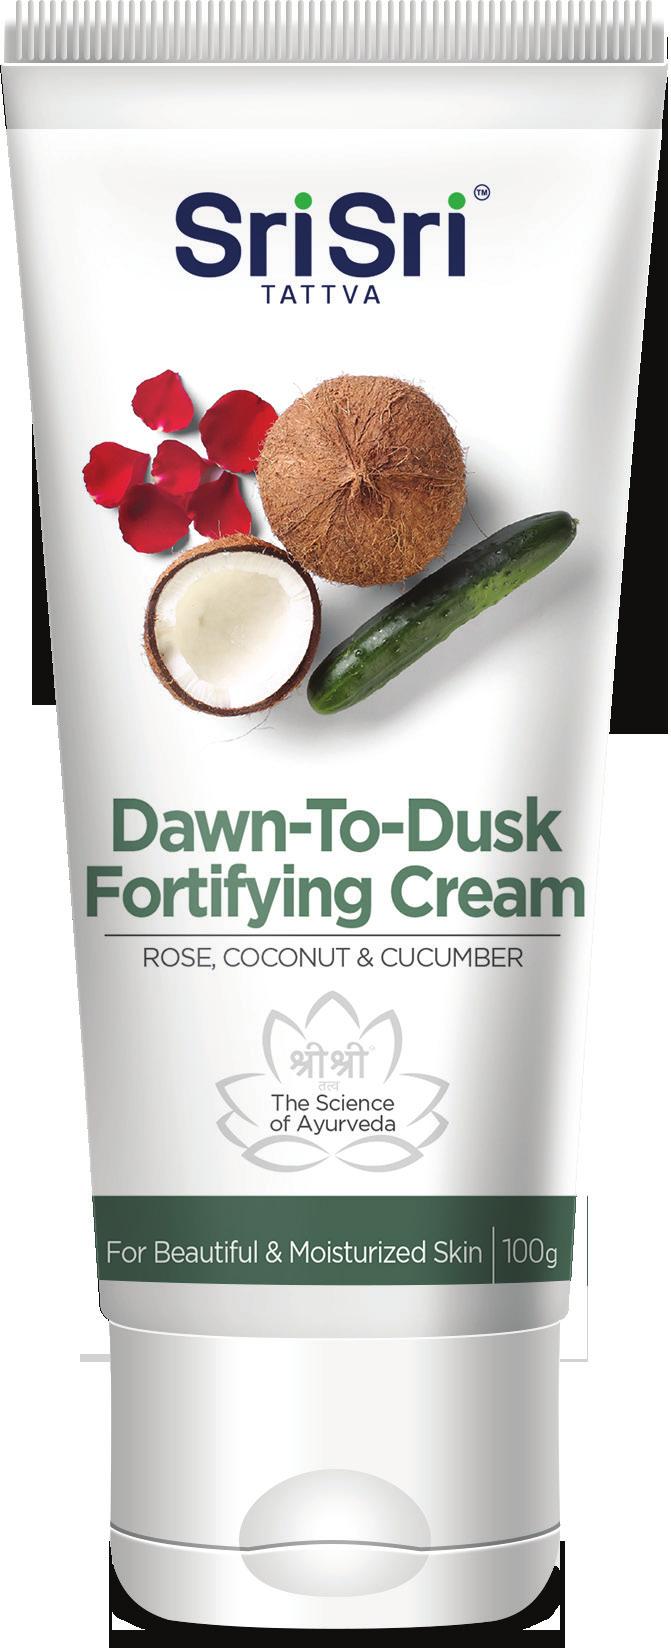 Dawn-to-Dusk Fortifying Cream Our fortifying day cream is rich with a combination of